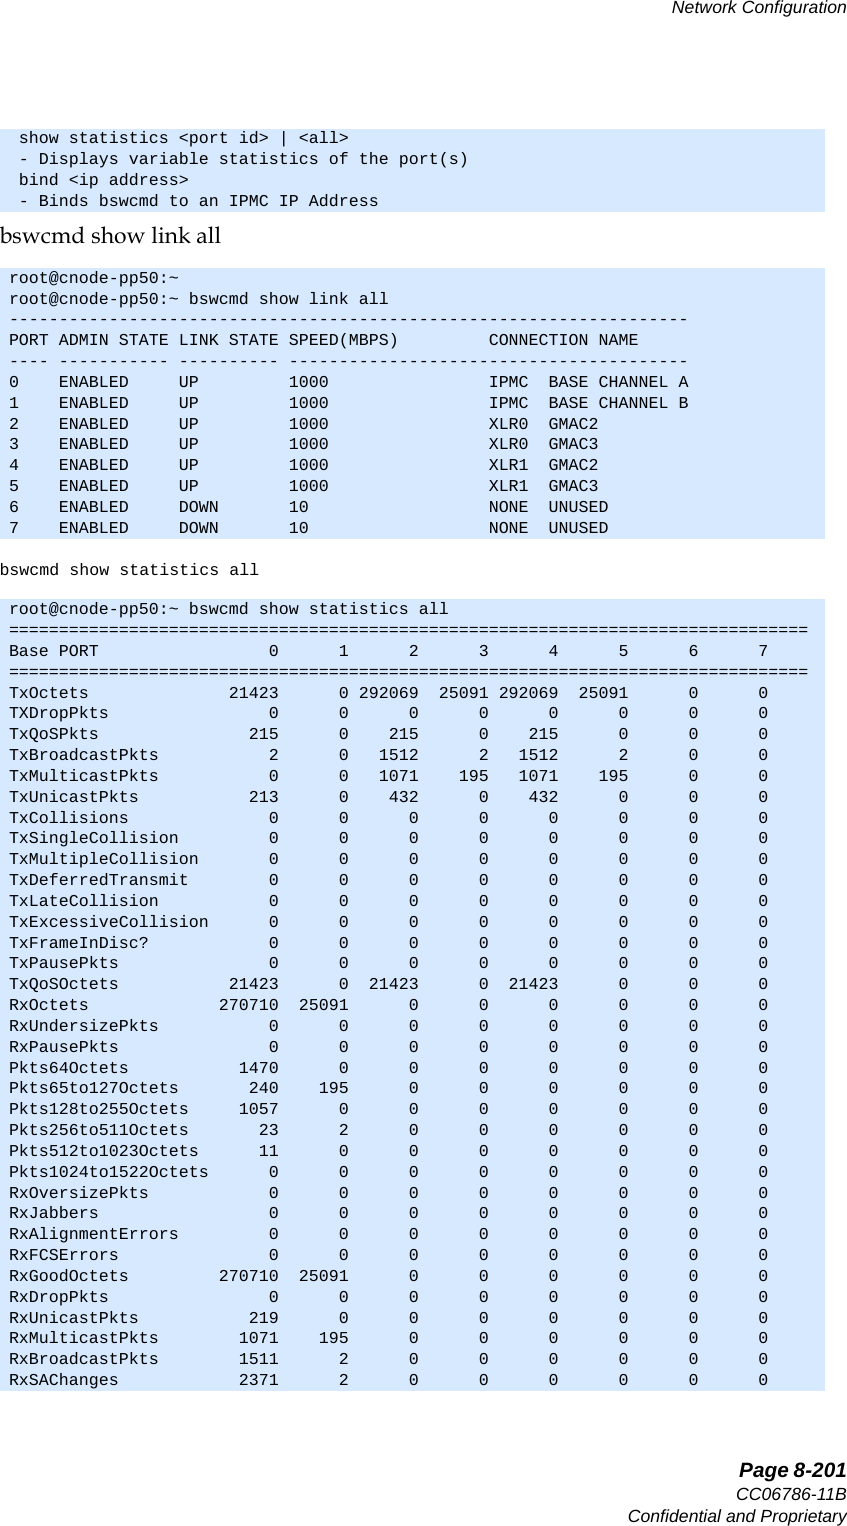   Page 8-201CC06786-11BConfidential and ProprietaryNetwork Configuration14ABABPreliminarybswcmd show link allbswcmd show statistics all show statistics &lt;port id&gt; | &lt;all&gt; - Displays variable statistics of the port(s) bind &lt;ip address&gt; - Binds bswcmd to an IPMC IP Addressroot@cnode-pp50:~root@cnode-pp50:~ bswcmd show link all--------------------------------------------------------------------PORT ADMIN STATE LINK STATE SPEED(MBPS)         CONNECTION NAME---- ----------- ---------- ----------------------------------------0    ENABLED     UP         1000                IPMC  BASE CHANNEL A1    ENABLED     UP         1000                IPMC  BASE CHANNEL B 2    ENABLED     UP         1000                XLR0  GMAC23    ENABLED     UP         1000                XLR0  GMAC34    ENABLED     UP         1000                XLR1  GMAC25    ENABLED     UP         1000                XLR1  GMAC36    ENABLED     DOWN       10                  NONE  UNUSED7    ENABLED     DOWN       10                  NONE  UNUSEDroot@cnode-pp50:~ bswcmd show statistics all================================================================================Base PORT                 0      1      2      3      4      5      6      7================================================================================TxOctets              21423      0 292069  25091 292069  25091      0      0TXDropPkts                0      0      0      0      0      0      0      0TxQoSPkts               215      0    215      0    215      0      0      0TxBroadcastPkts           2      0   1512      2   1512      2      0      0TxMulticastPkts           0      0   1071    195   1071    195      0      0TxUnicastPkts           213      0    432      0    432      0      0      0TxCollisions              0      0      0      0      0      0      0      0TxSingleCollision         0      0      0      0      0      0      0      0TxMultipleCollision       0      0      0      0      0      0      0      0TxDeferredTransmit        0      0      0      0      0      0      0      0TxLateCollision           0      0      0      0      0      0      0      0TxExcessiveCollision      0      0      0      0      0      0      0      0TxFrameInDisc?            0      0      0      0      0      0      0      0TxPausePkts               0      0      0      0      0      0      0      0TxQoSOctets           21423      0  21423      0  21423      0      0      0RxOctets             270710  25091      0      0      0      0      0      0RxUndersizePkts           0      0      0      0      0      0      0      0RxPausePkts               0      0      0      0      0      0      0      0Pkts64Octets           1470      0      0      0      0      0      0      0Pkts65to127Octets       240    195      0      0      0      0      0      0Pkts128to255Octets     1057      0      0      0      0      0      0      0Pkts256to511Octets       23      2      0      0      0      0      0      0Pkts512to1023Octets      11      0      0      0      0      0      0      0Pkts1024to1522Octets      0      0      0      0      0      0      0      0RxOversizePkts            0      0      0      0      0      0      0      0RxJabbers                 0      0      0      0      0      0      0      0RxAlignmentErrors         0      0      0      0      0      0      0      0RxFCSErrors               0      0      0      0      0      0      0      0RxGoodOctets         270710  25091      0      0      0      0      0      0RxDropPkts                0      0      0      0      0      0      0      0RxUnicastPkts           219      0      0      0      0      0      0      0RxMulticastPkts        1071    195      0      0      0      0      0      0RxBroadcastPkts        1511      2      0      0      0      0      0      0RxSAChanges            2371      2      0      0      0      0      0      0